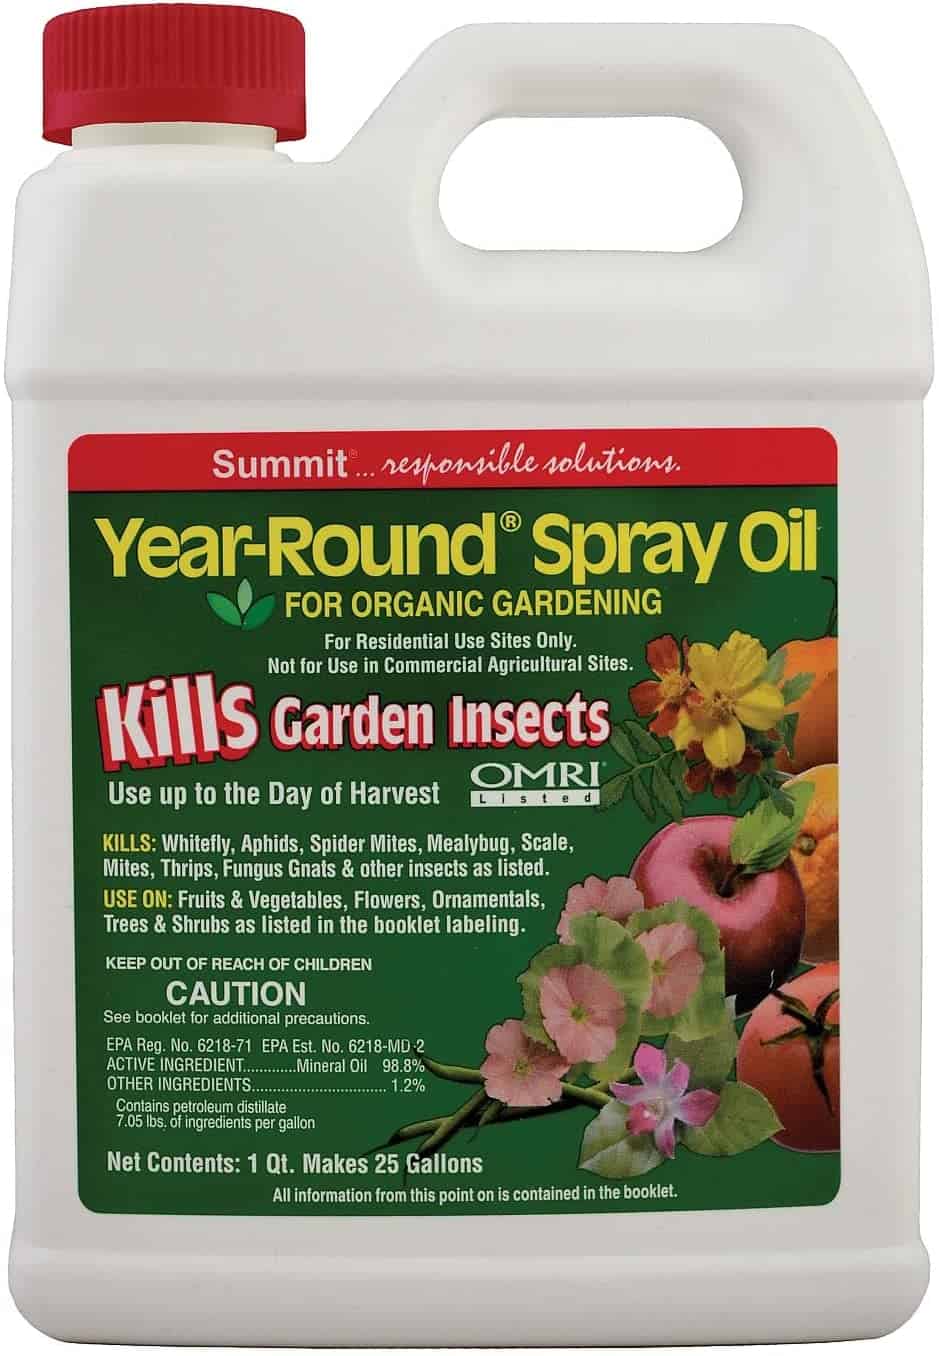 a bottle of Summit Year-Round Spray Oil concentrate